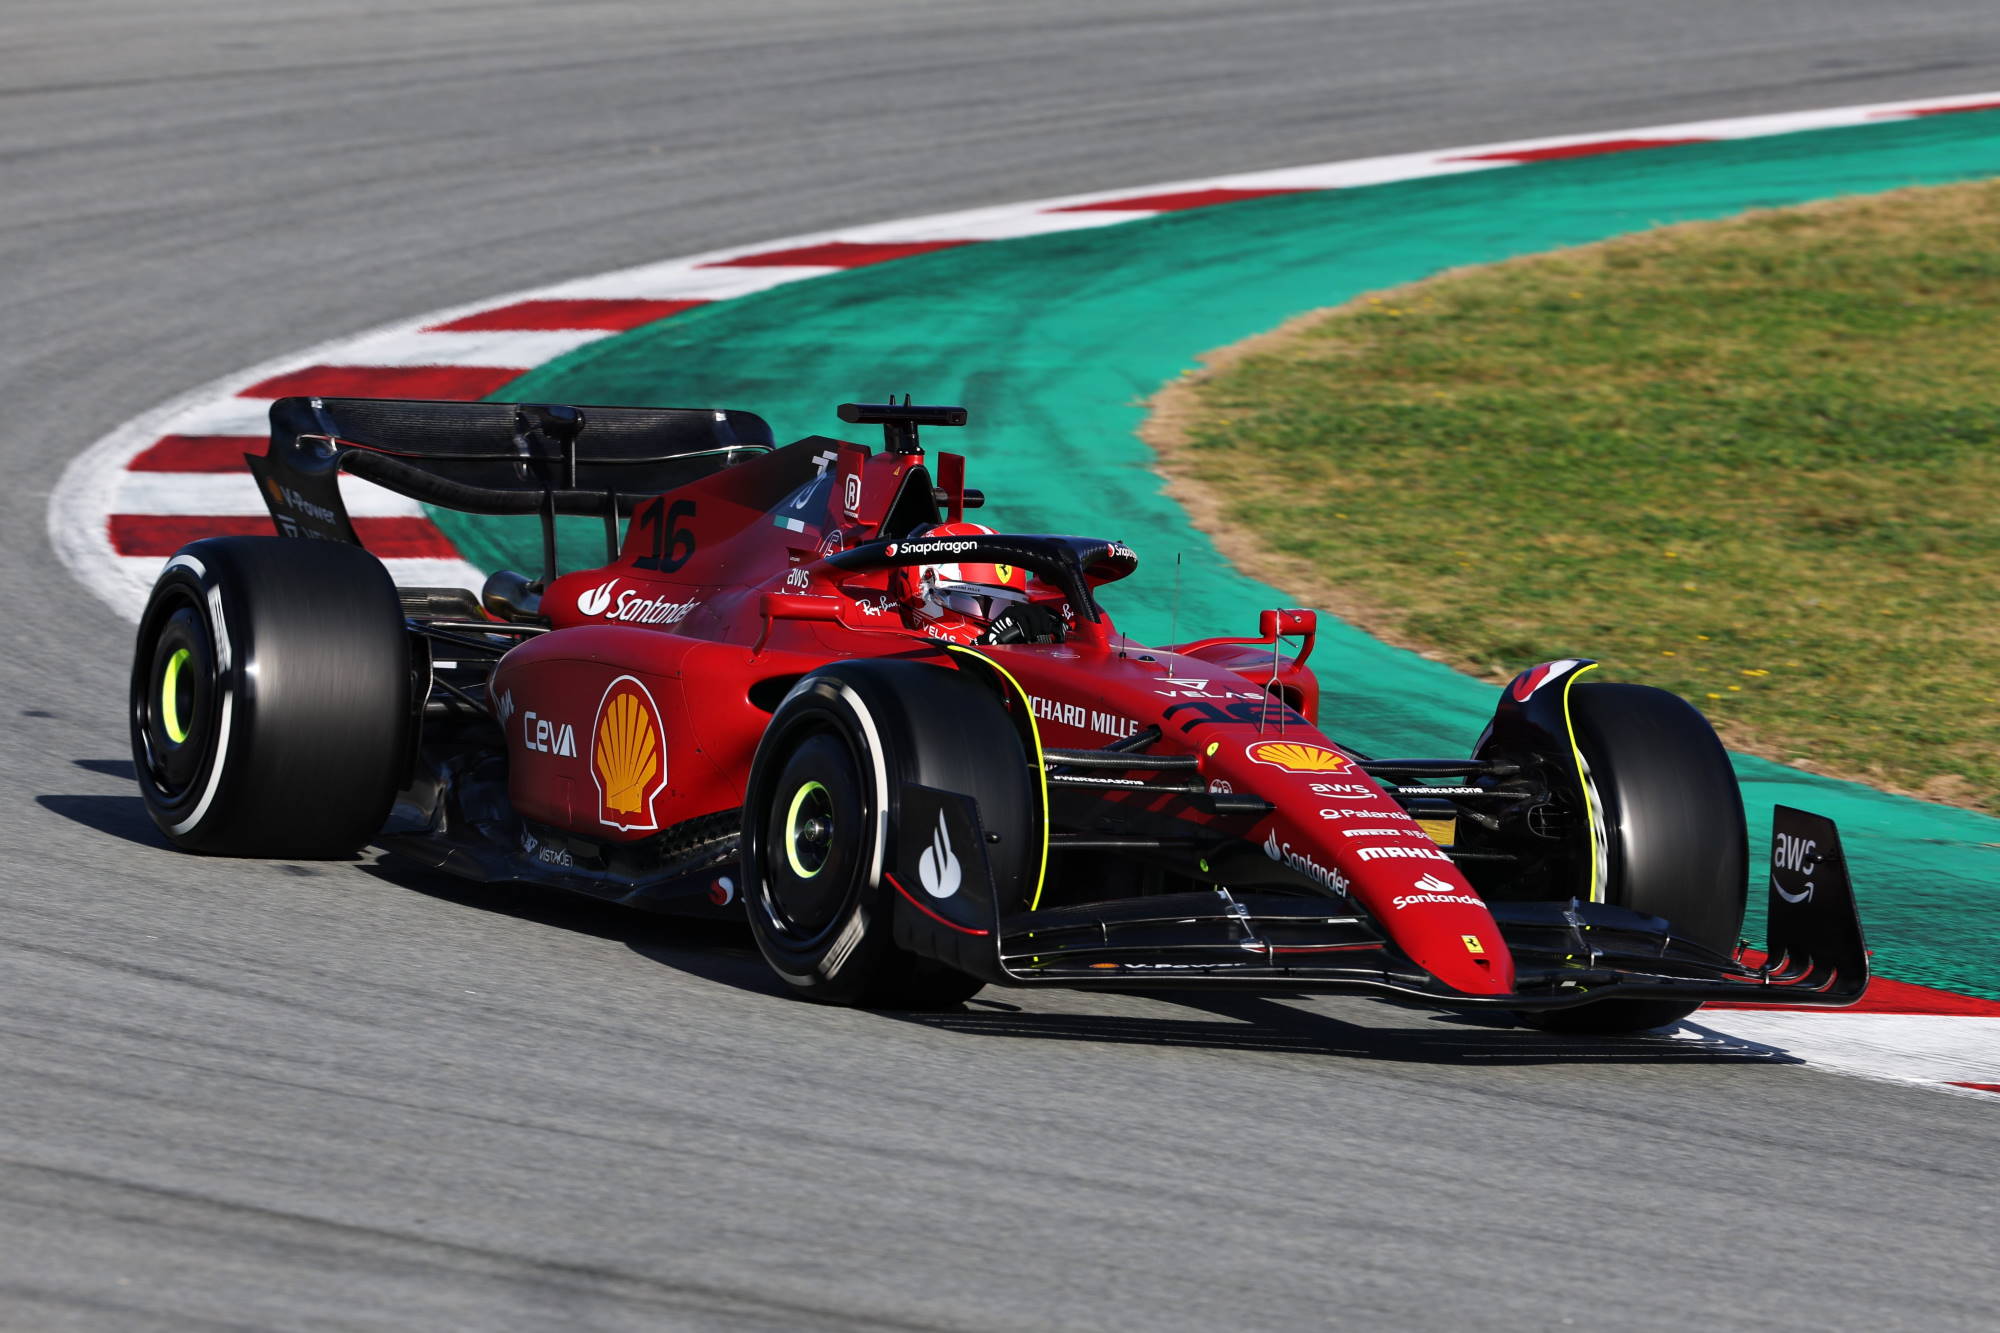 Feel the power of the Ferrari F1 75 with this wallpaper 2000x1333